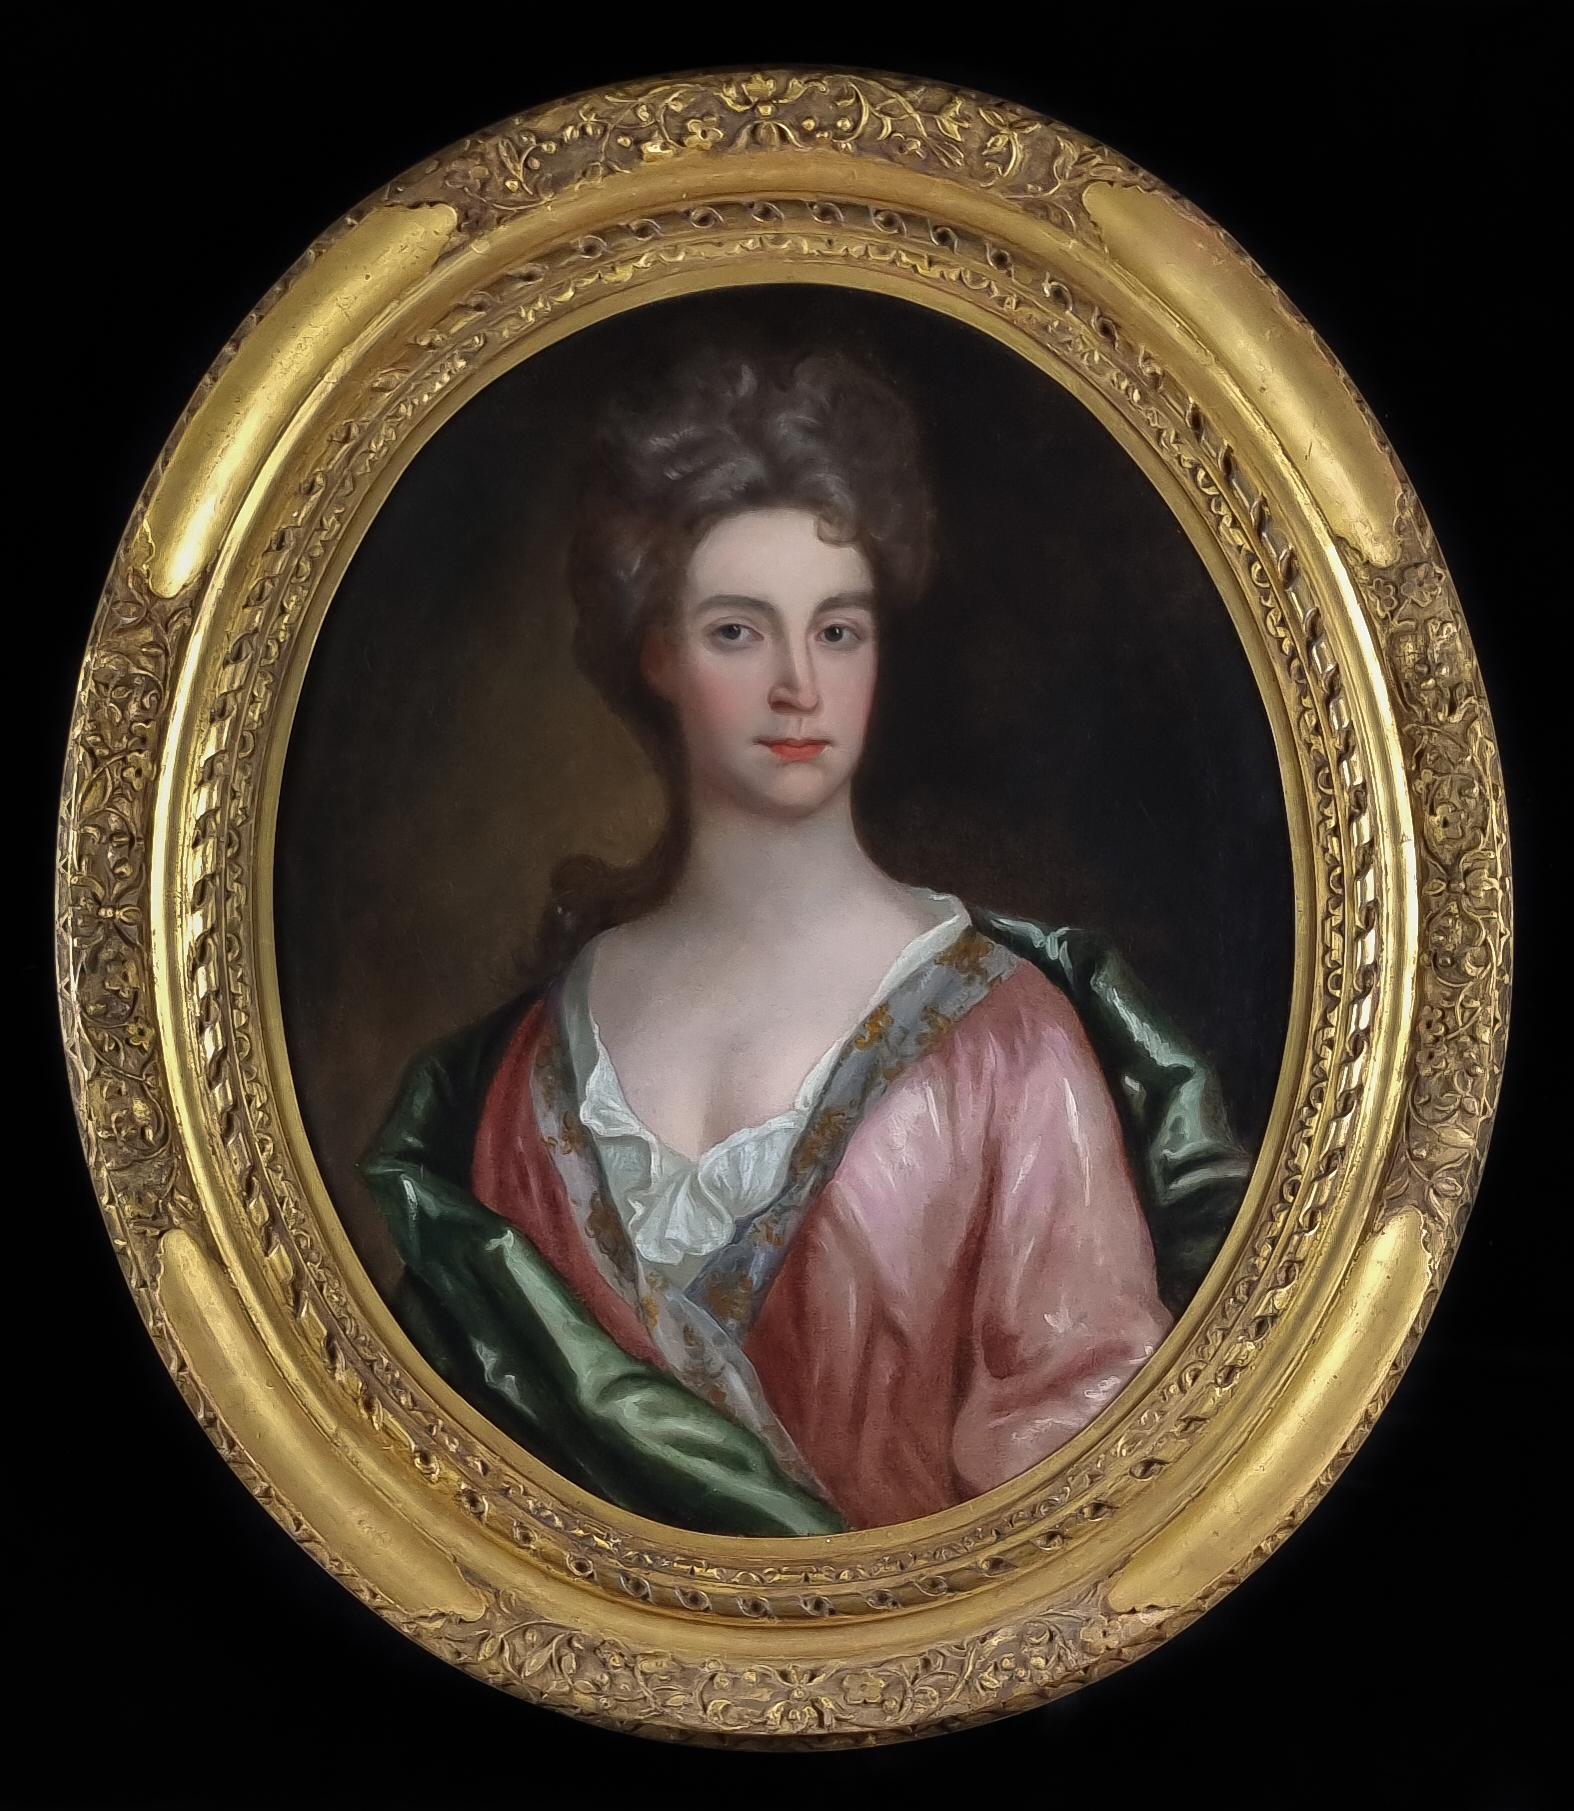 Portrait of a Lady in a Pink Dress and Green Wrap c.1695, Antique Oil Painting - Art by (Circle of) Godfrey Kneller